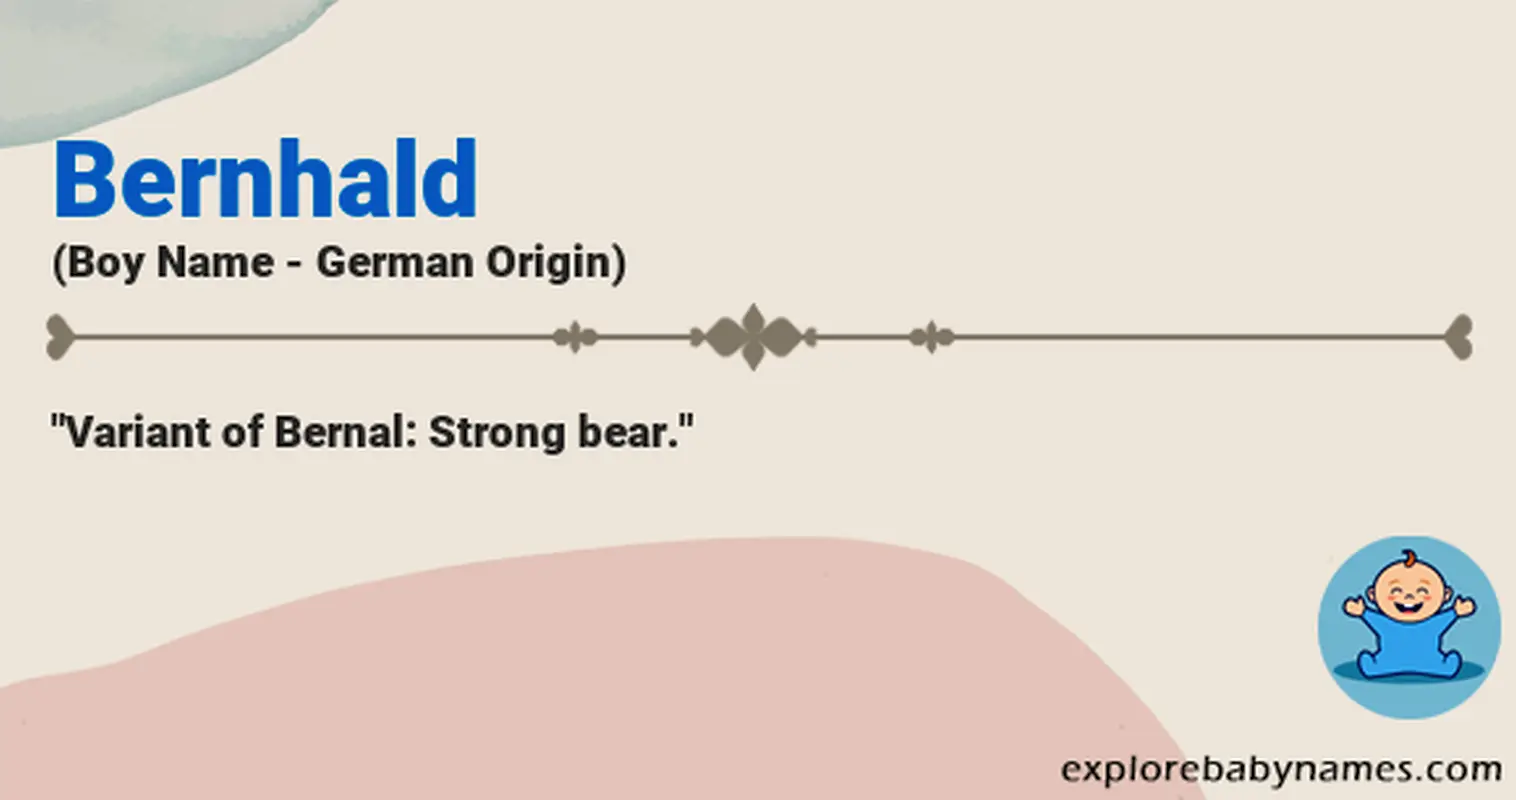 Meaning of Bernhald